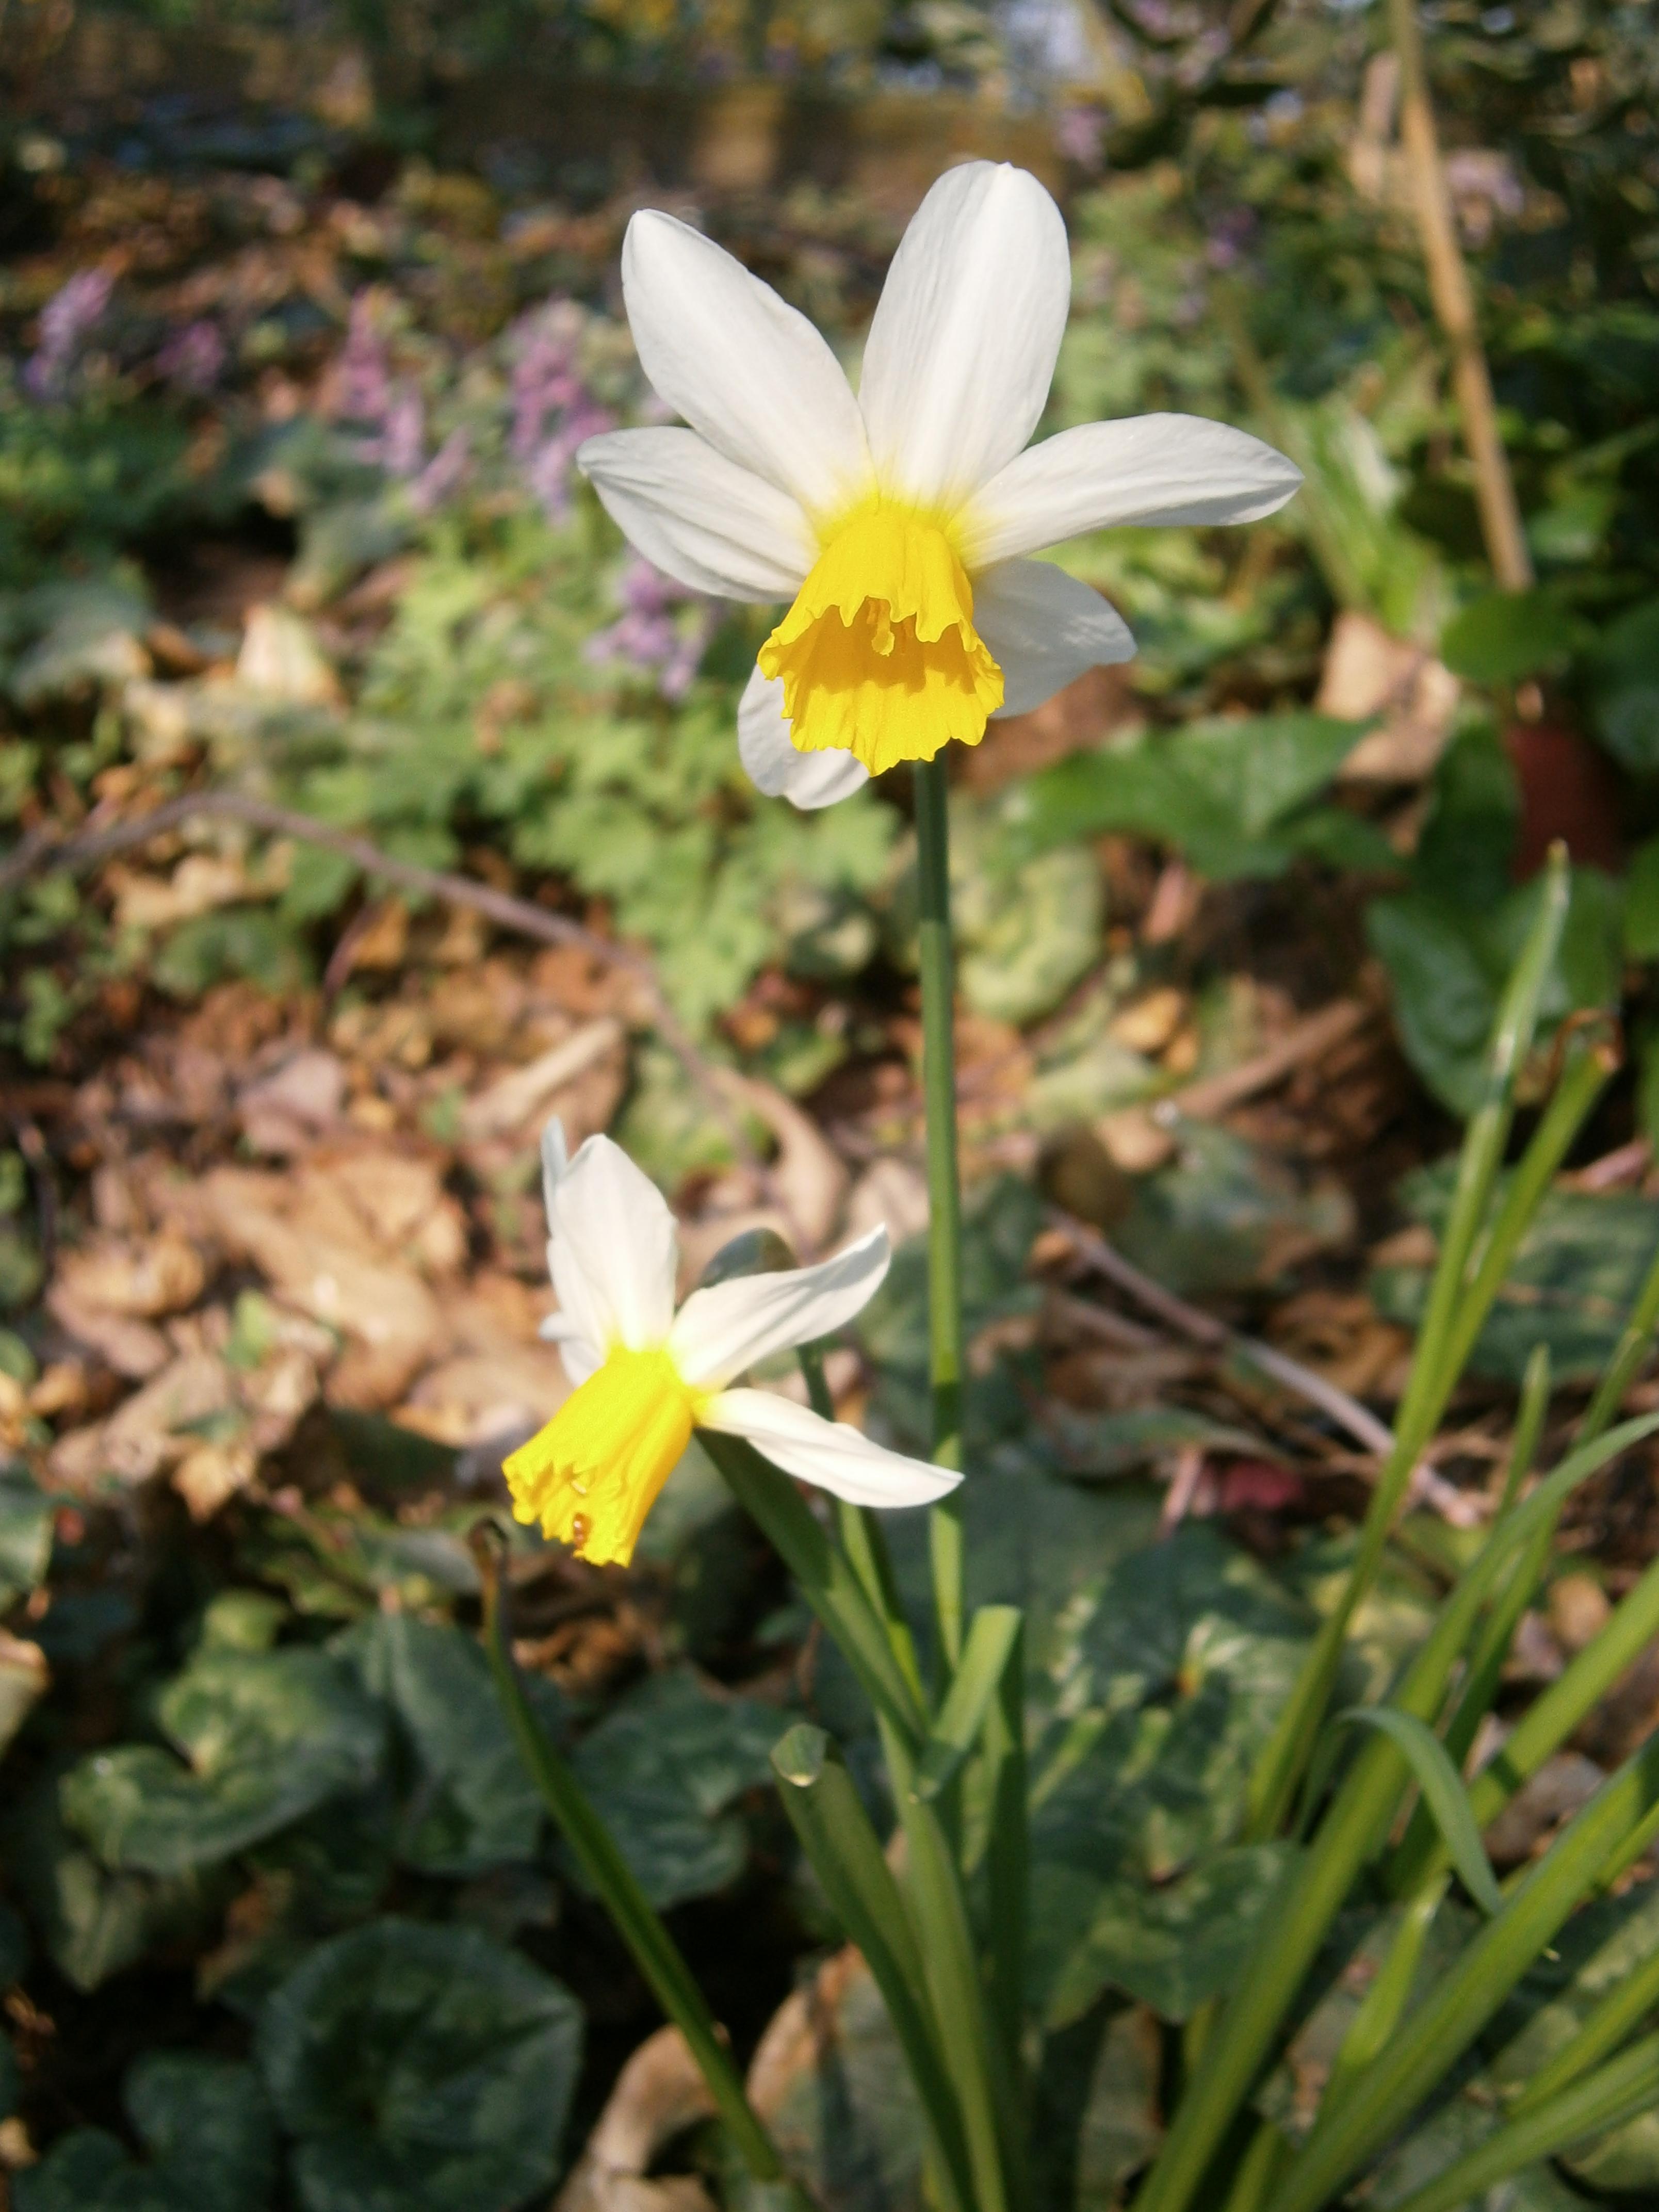 White flower with yellow center stigma and anthers, green stems and leaves,